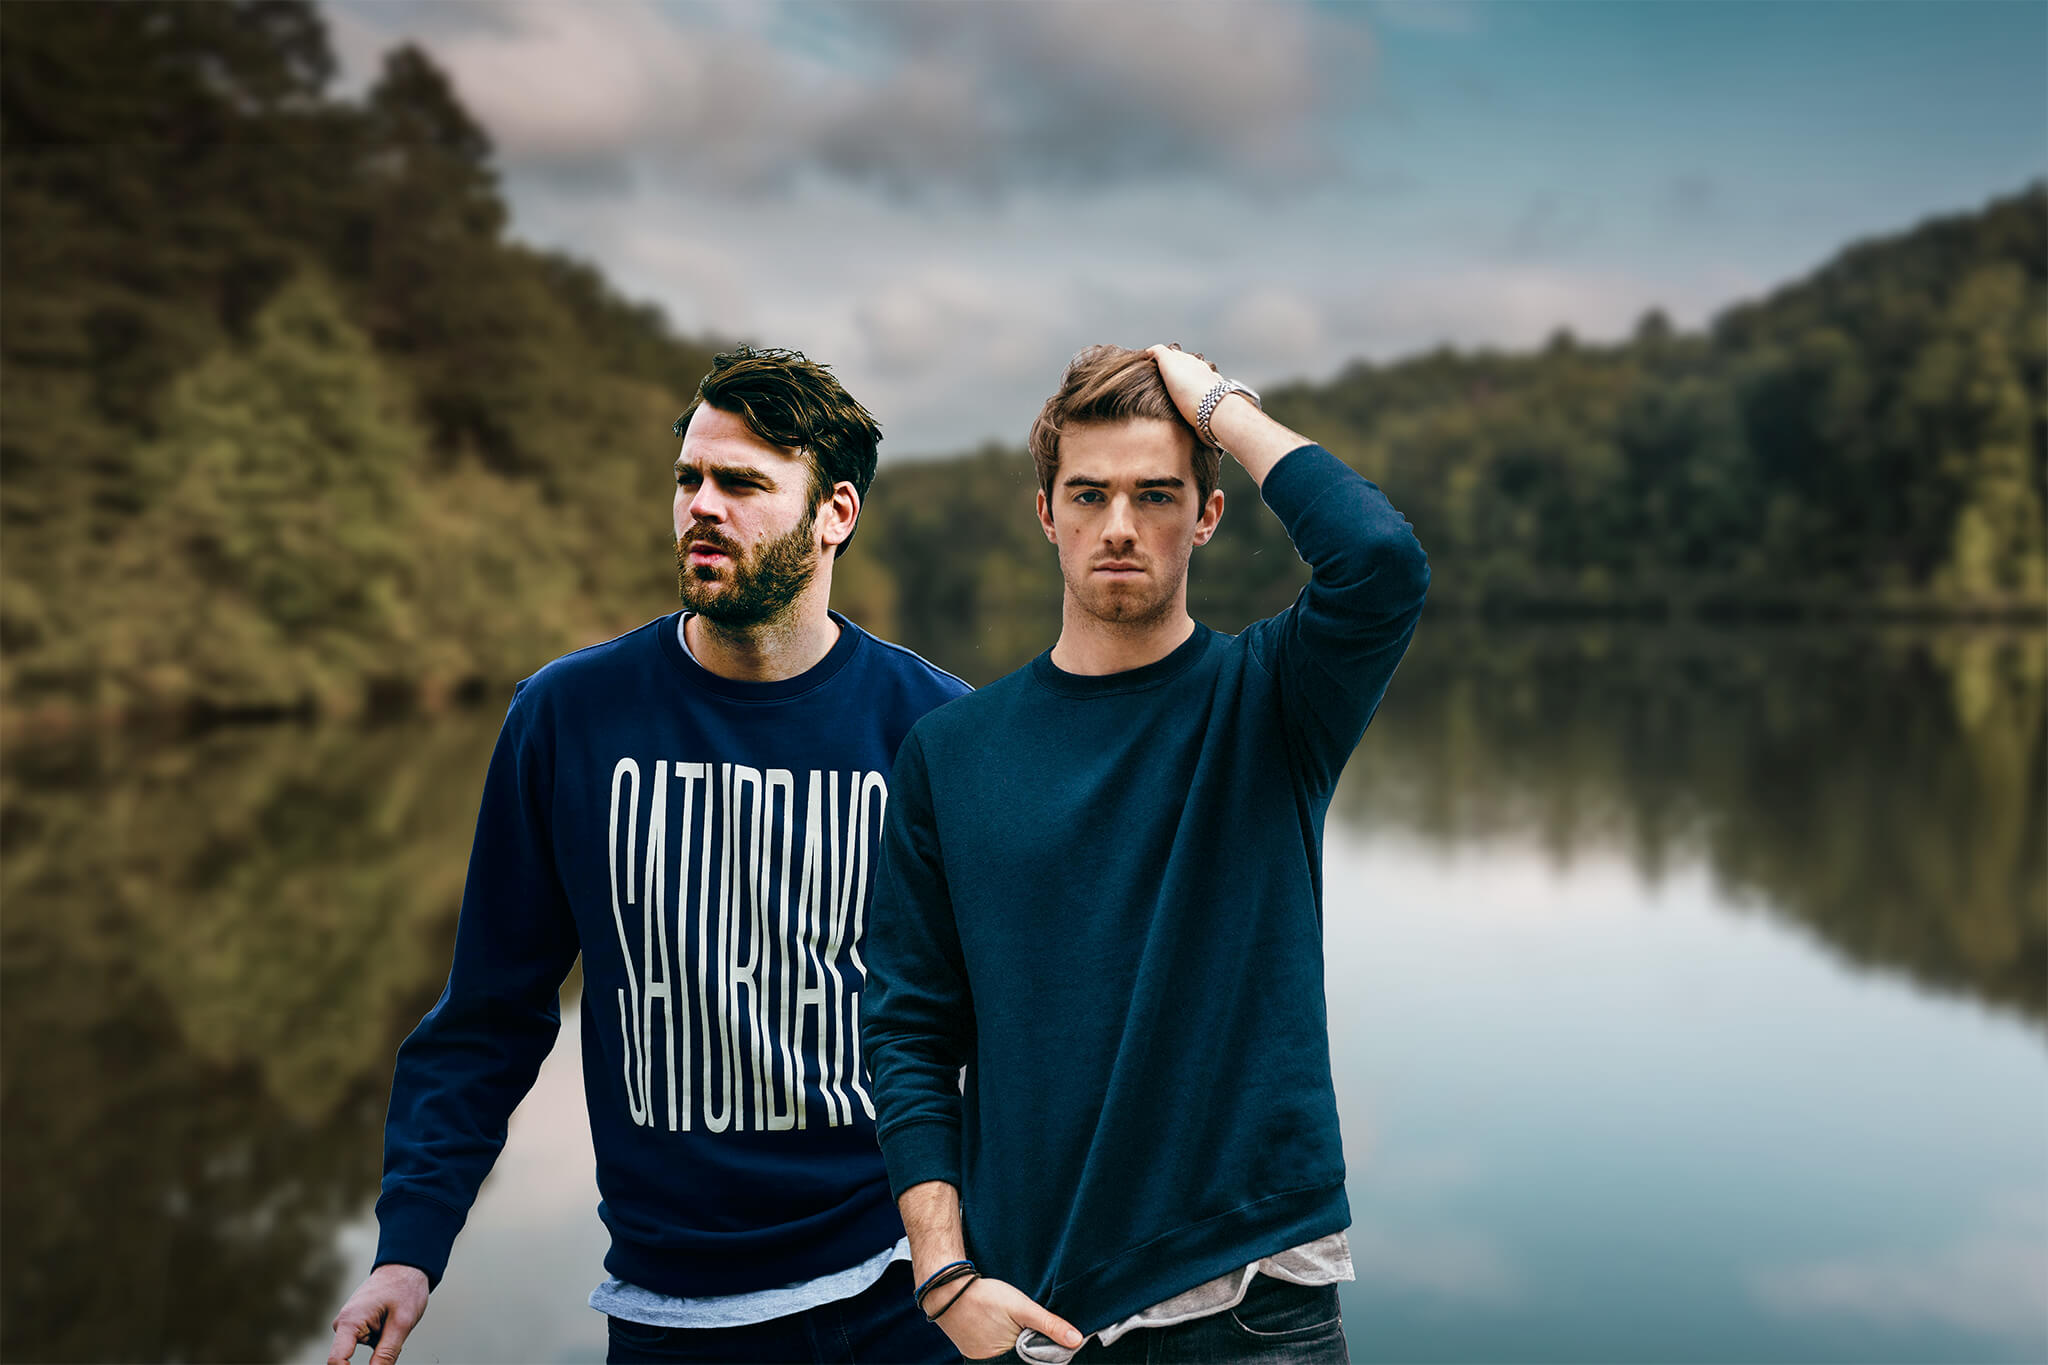 Music The Chainsmokers HD Wallpaper | Background Image